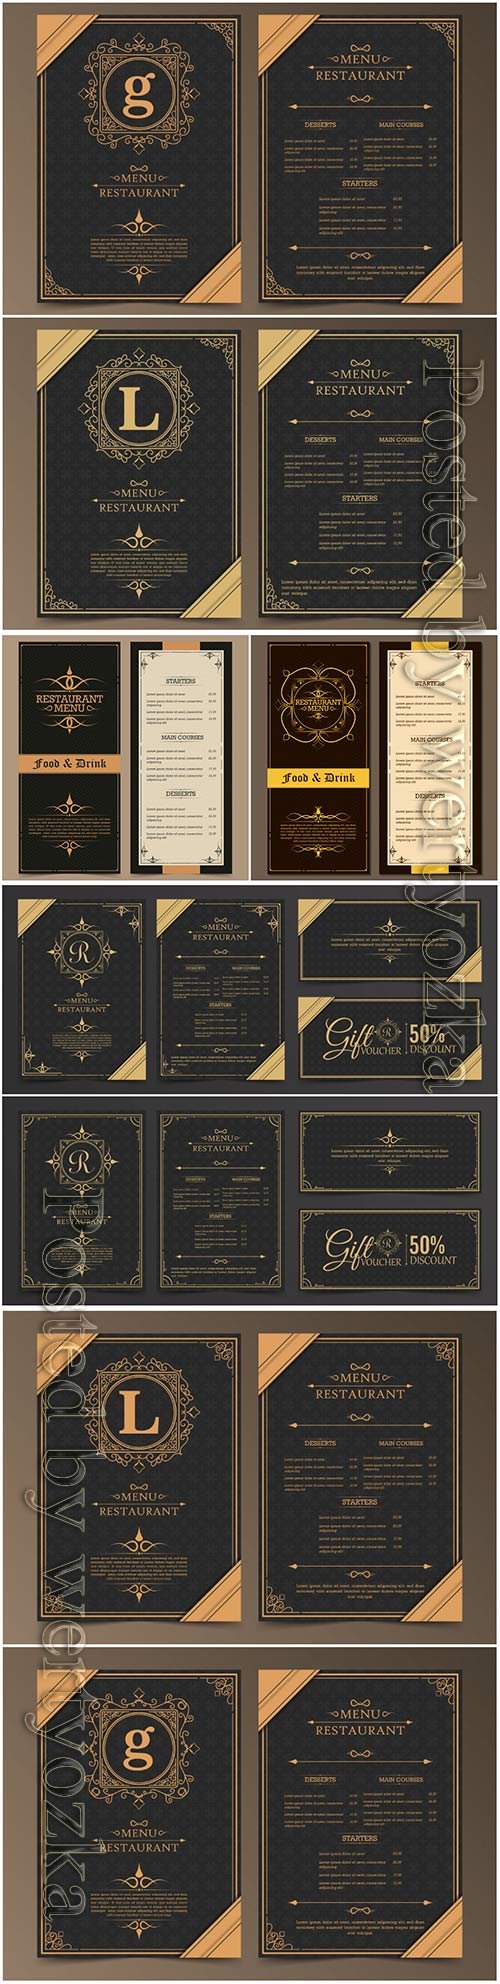 Menu layout with ornamental elements